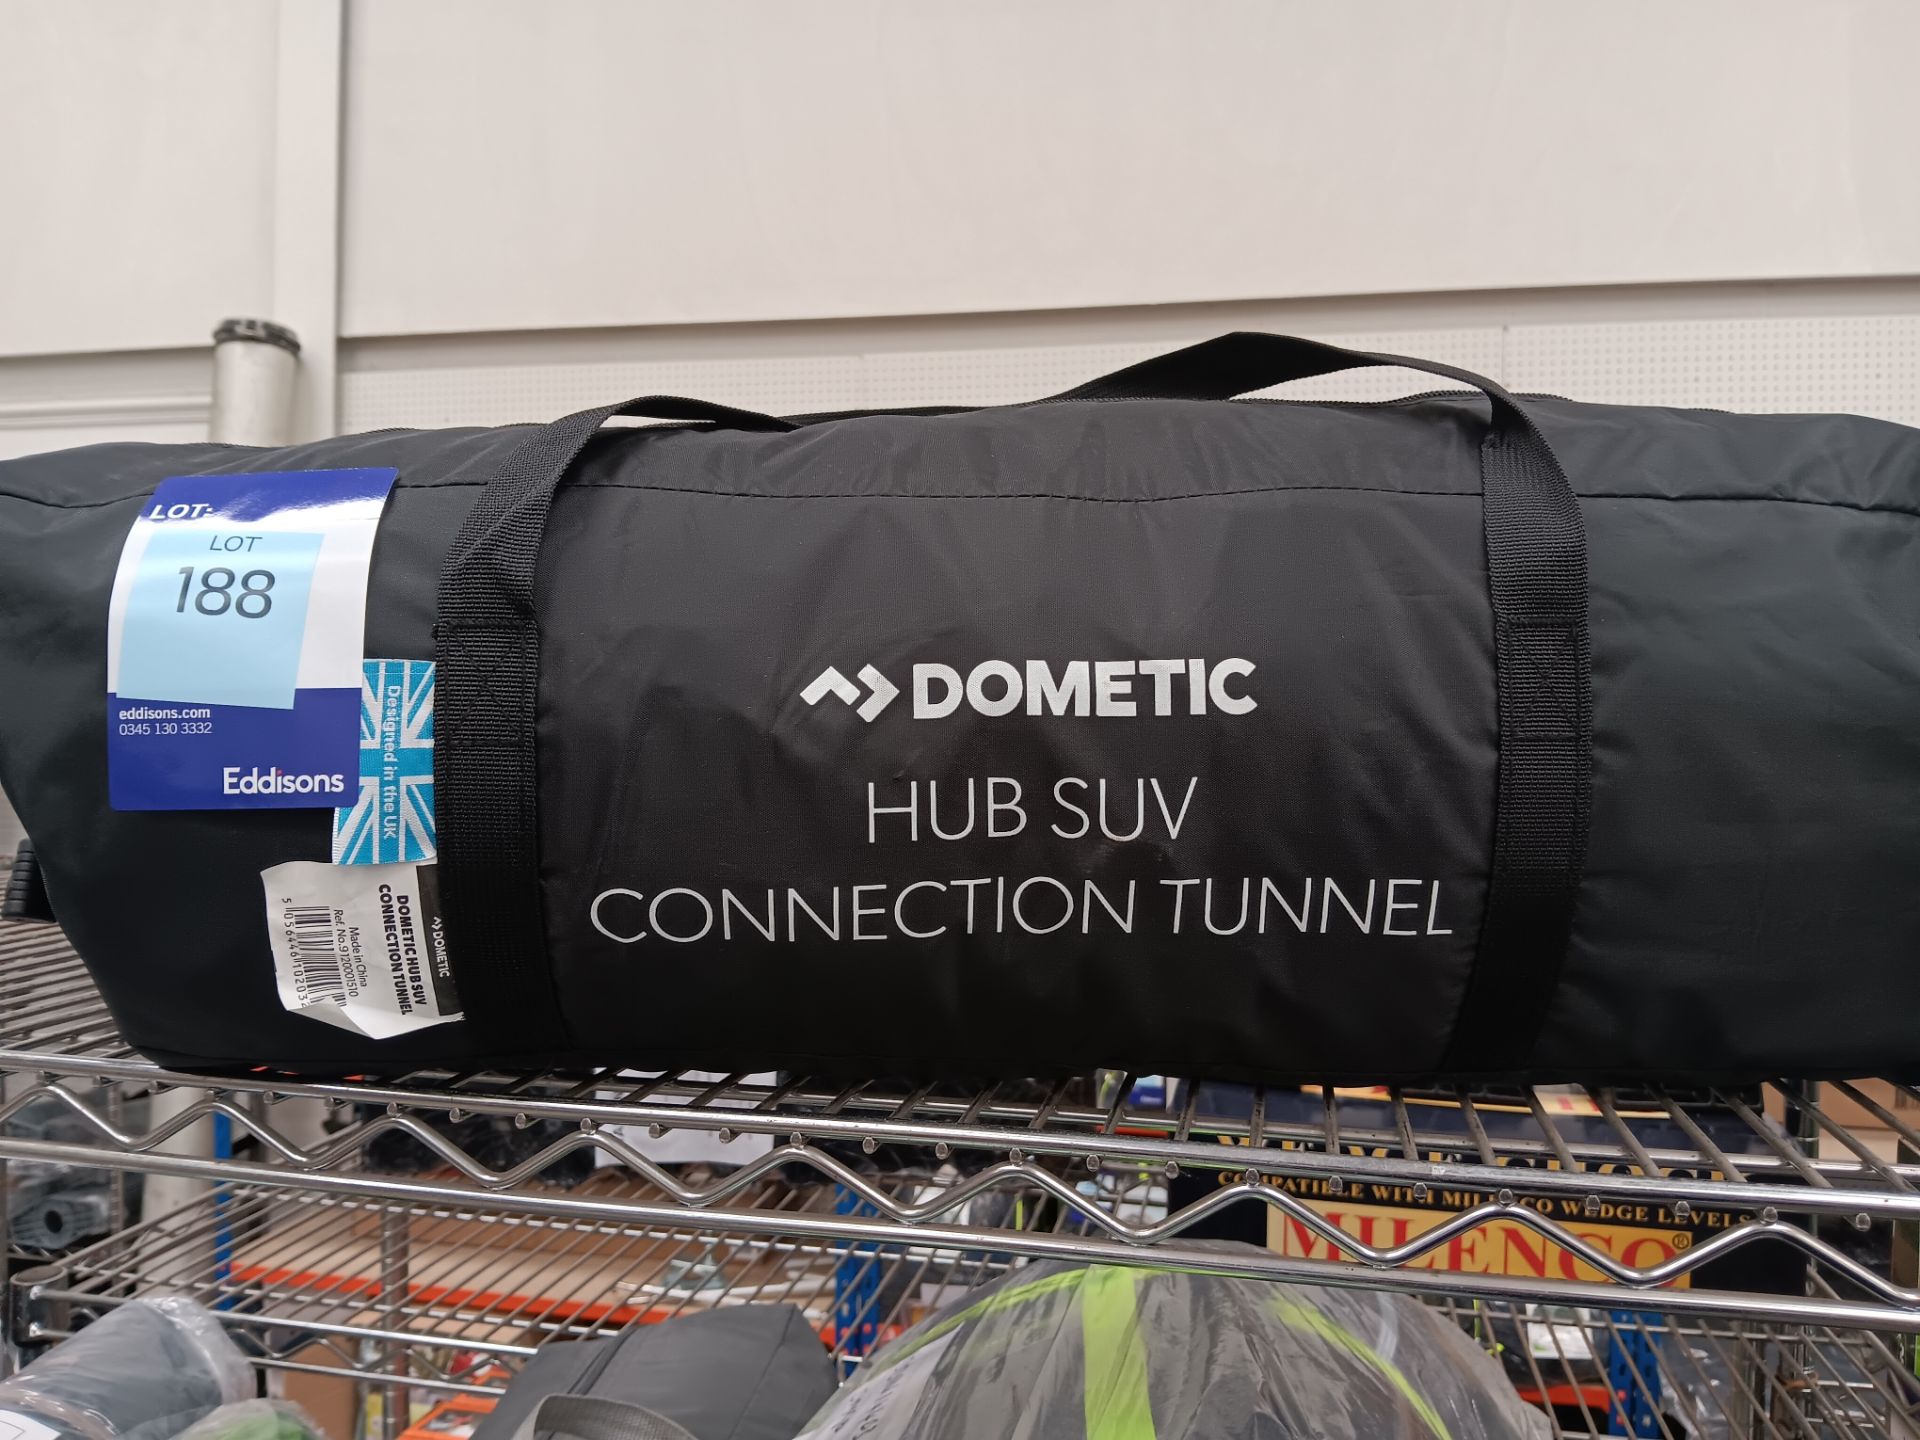 Dometic Hub SUV Connection Tunnel (Please note, Viewing Strongly Recommended - Eddisons have not